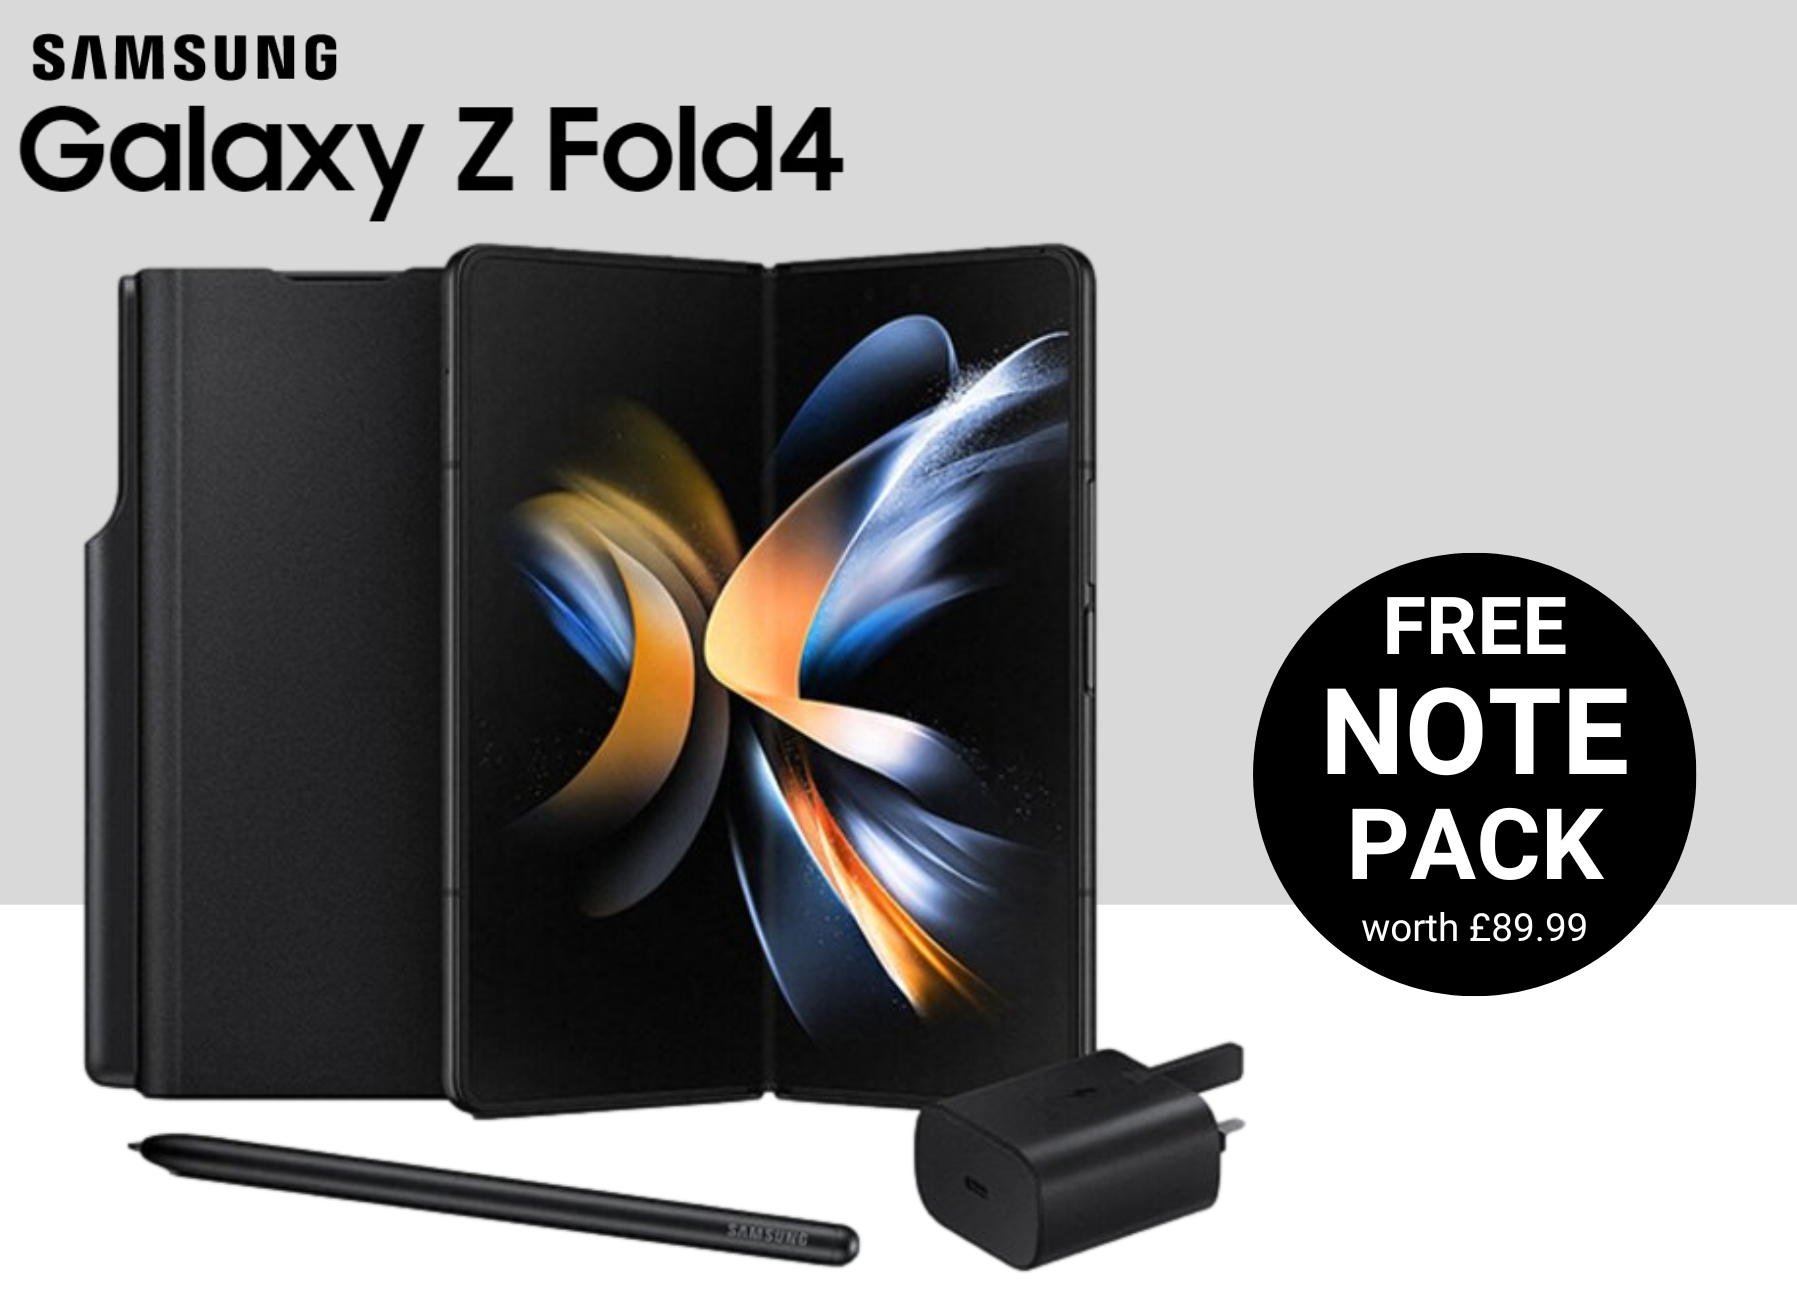 Free Samsung Note Starter Pack including Stand Case, S-Pen and Travel Adaptor